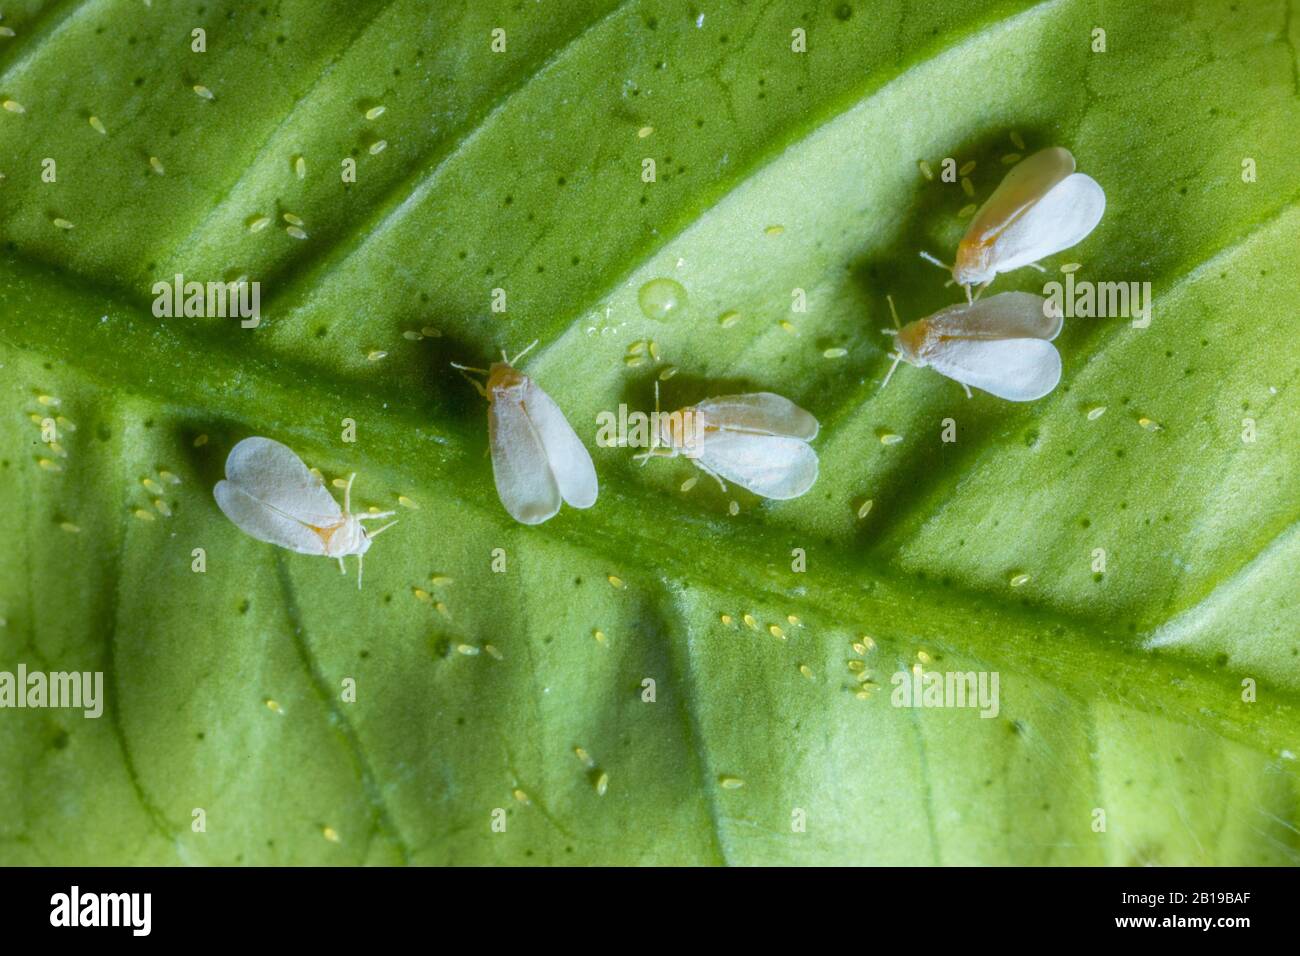 greenhouse whitefly (Trialeurodes vaporariorum), group laying eggs on a lemon leaf, view from above Stock Photo